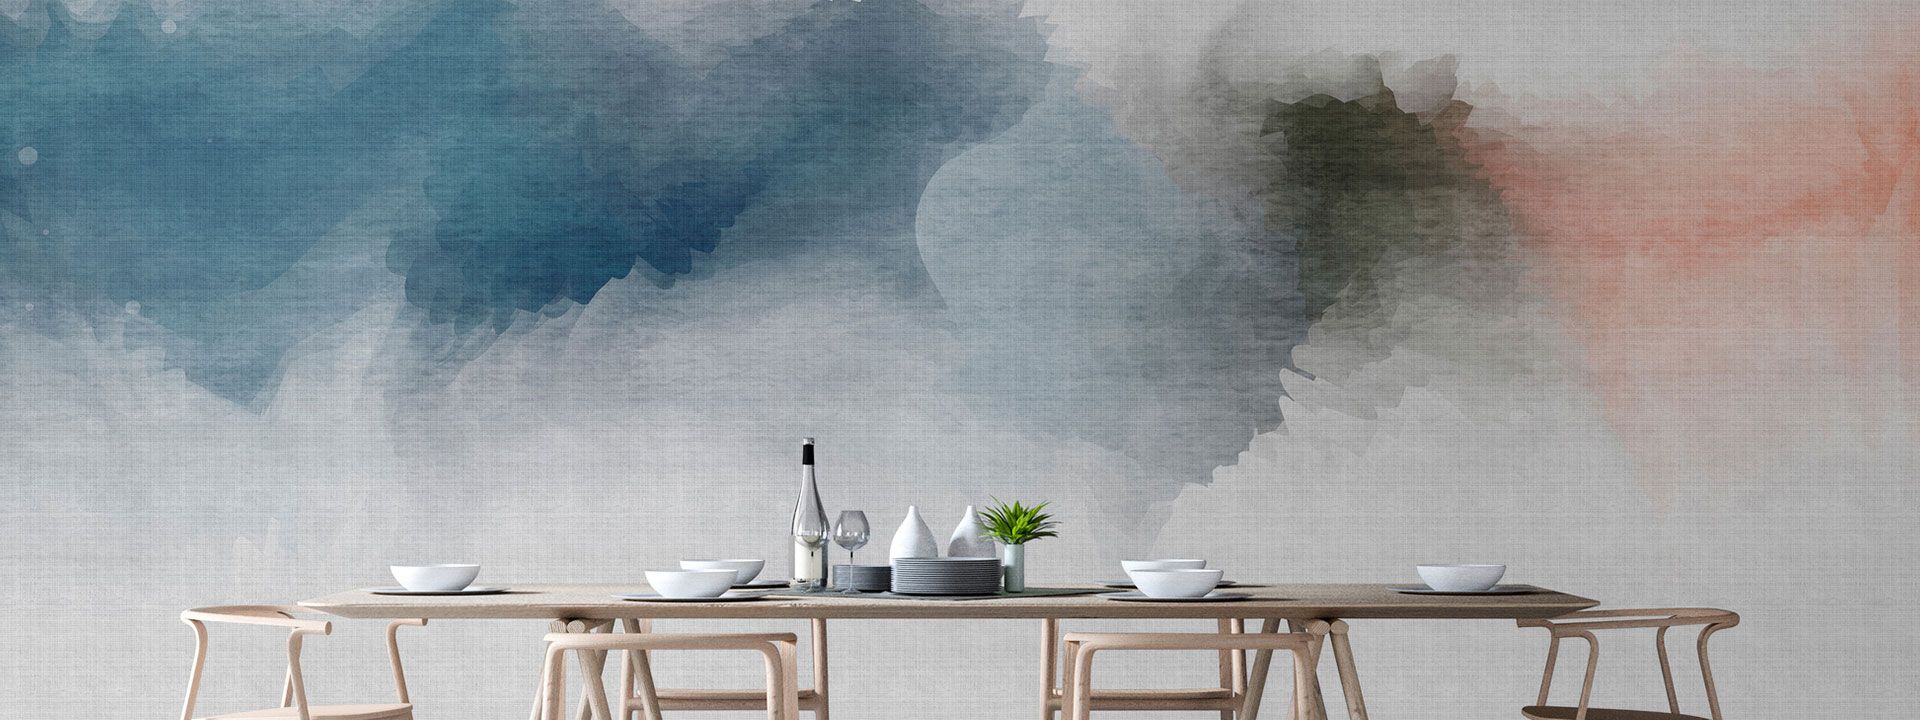 Dining room with colour clouds motif abstract photo wallpaper DD114362